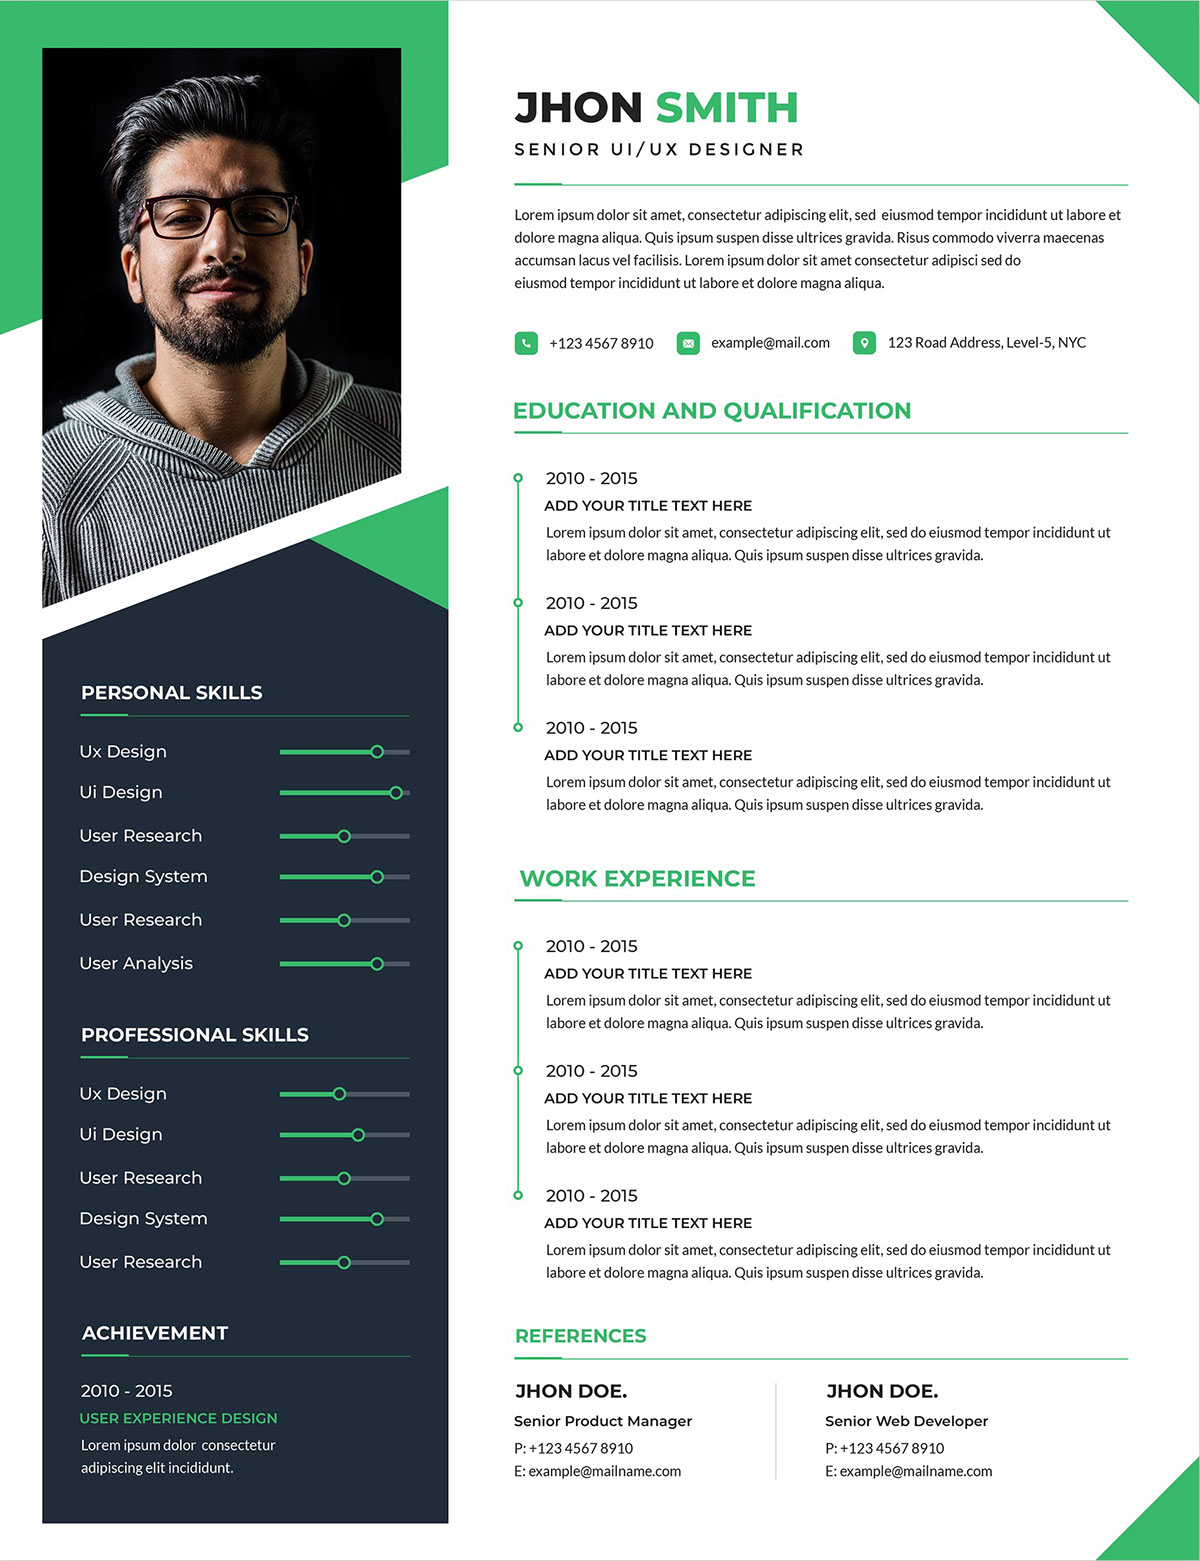 Clean and modern resume portfolio or cv template rendition image